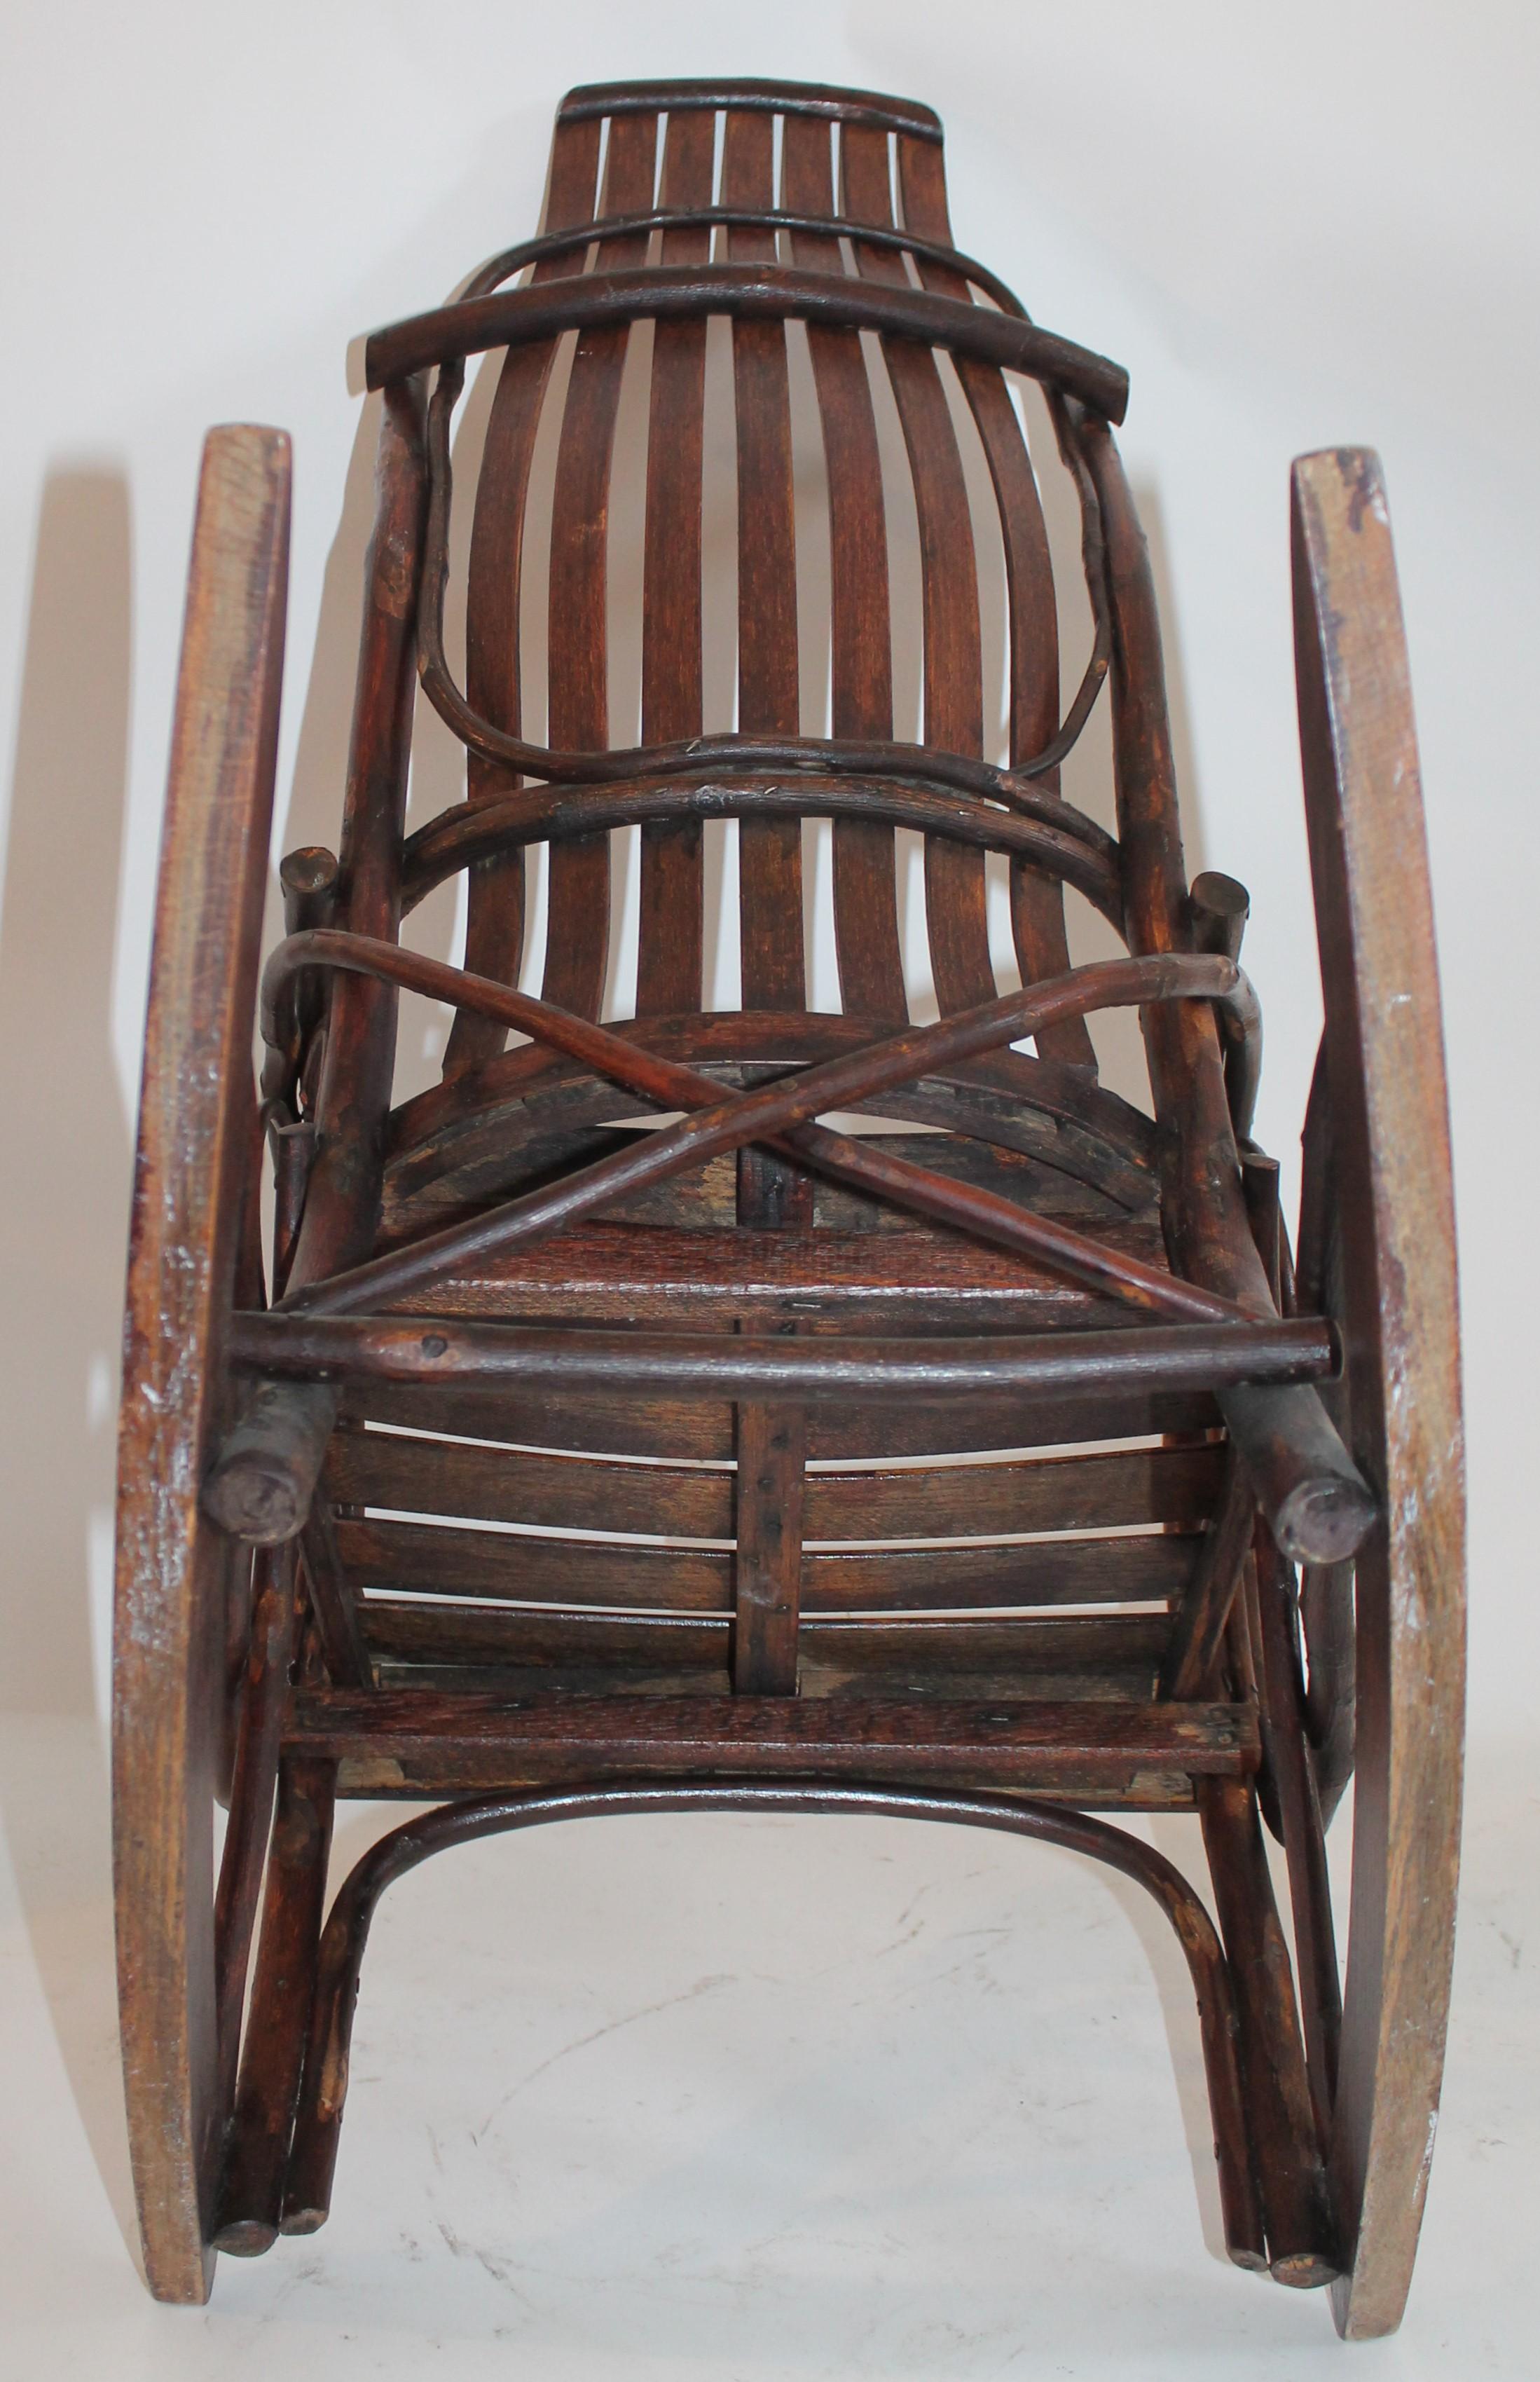 Hand-Crafted Amish Bent Wood Child's Rocking Chair For Sale